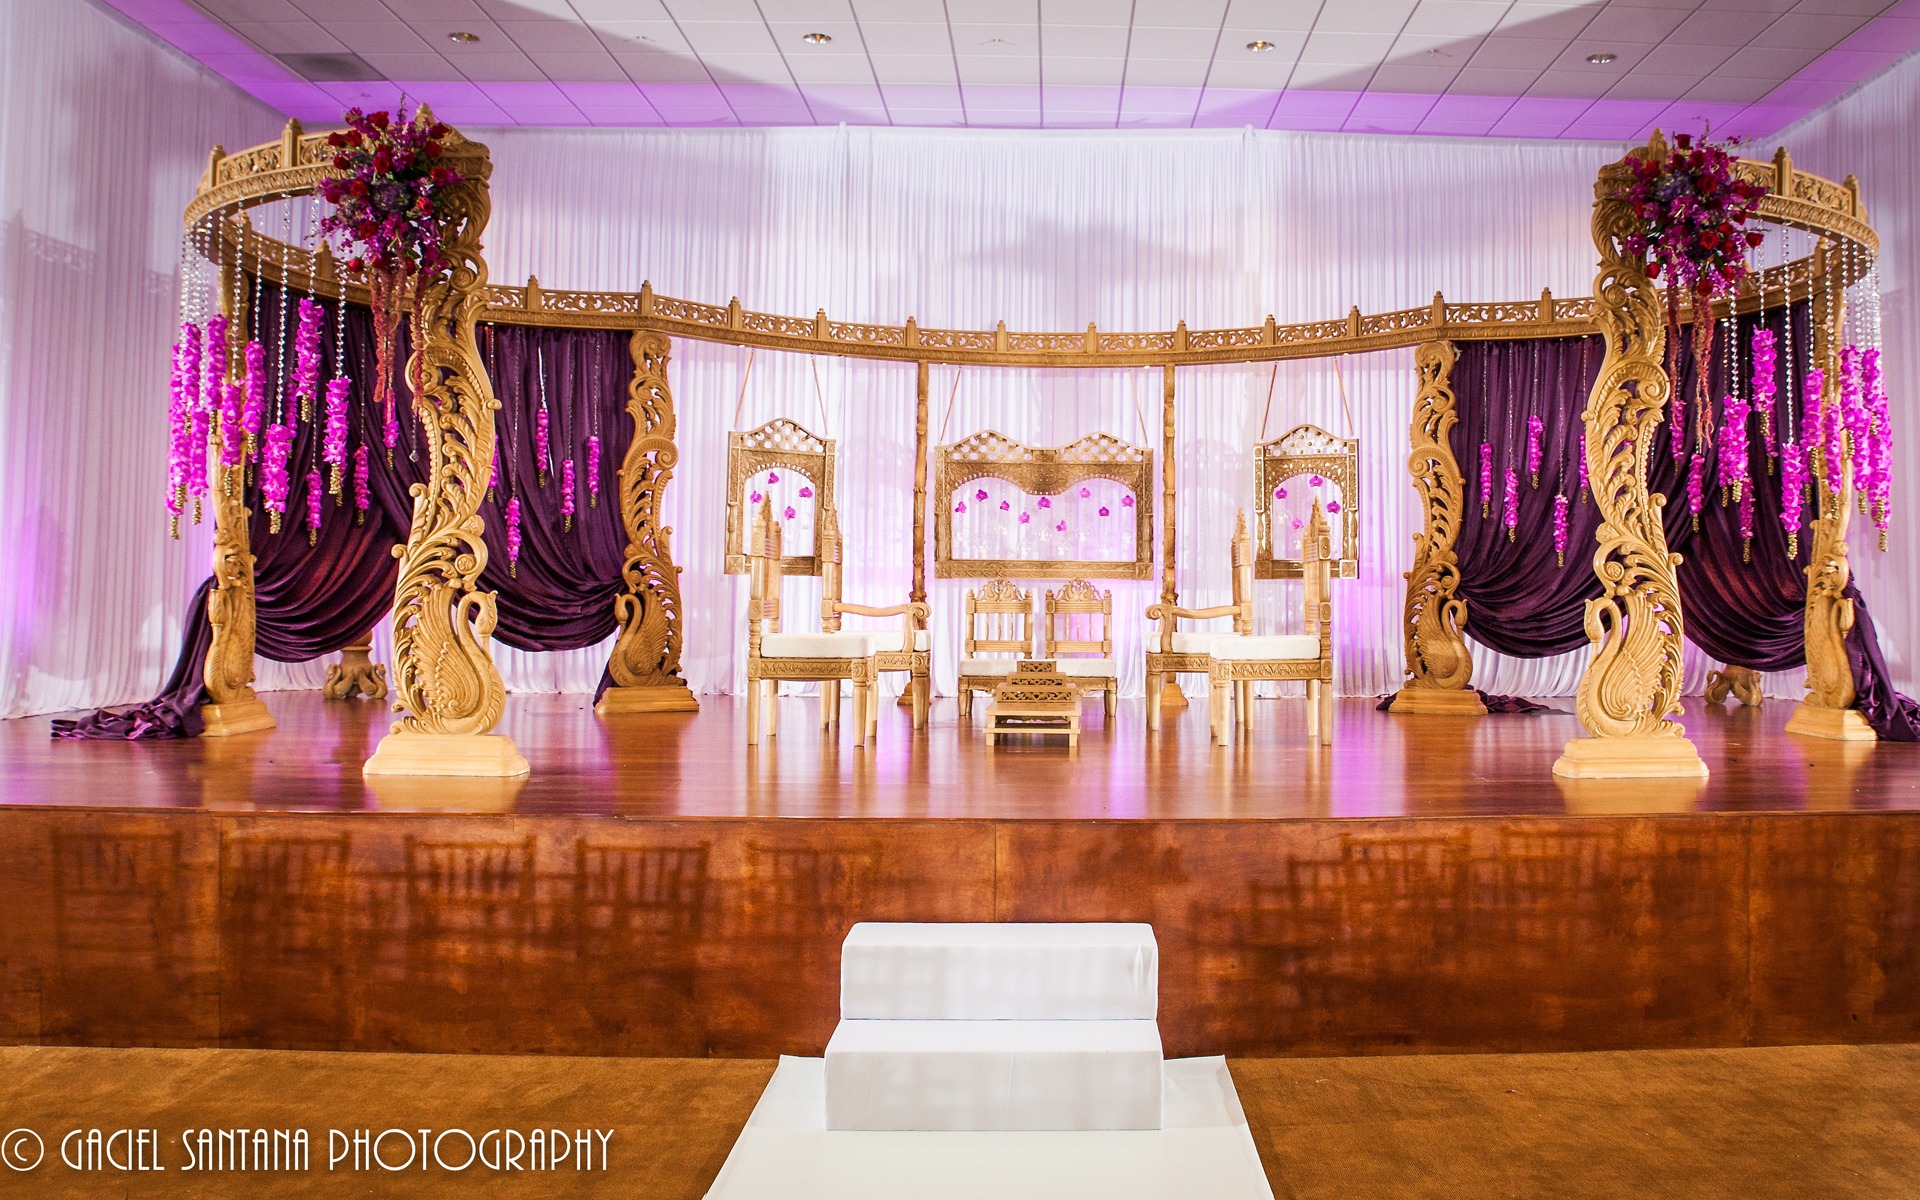 LoversVow Ceremony Boho Chic 1 South Asian Indian Wedding Suhaag Garden Florida